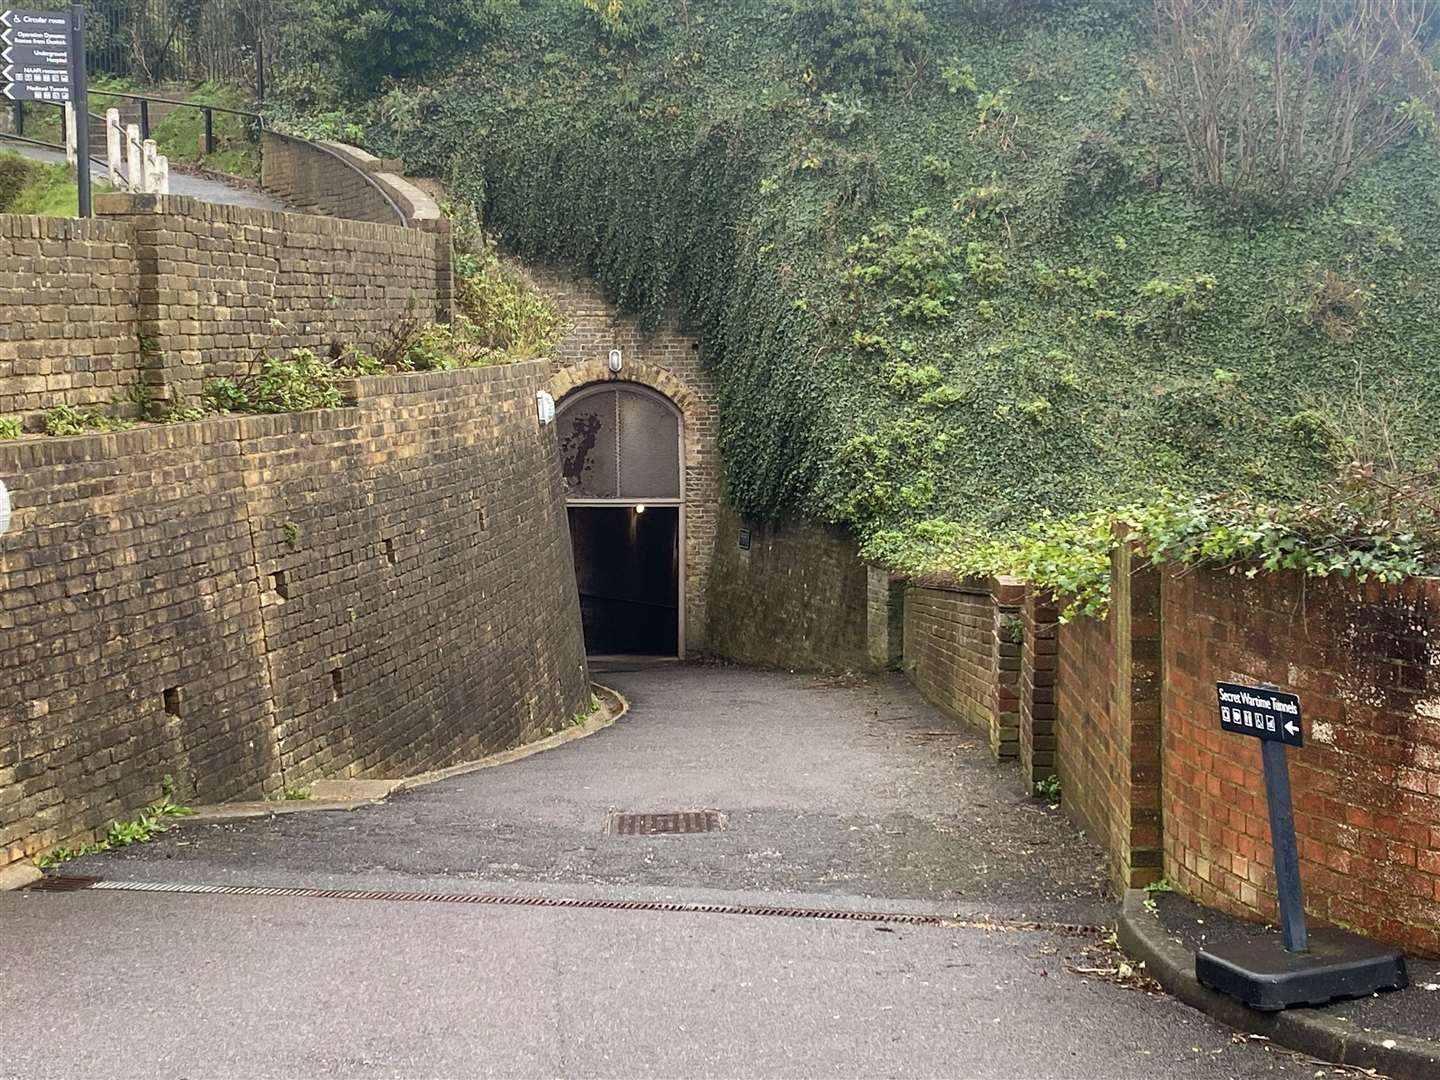 The entrance for the secret wartime tunnels